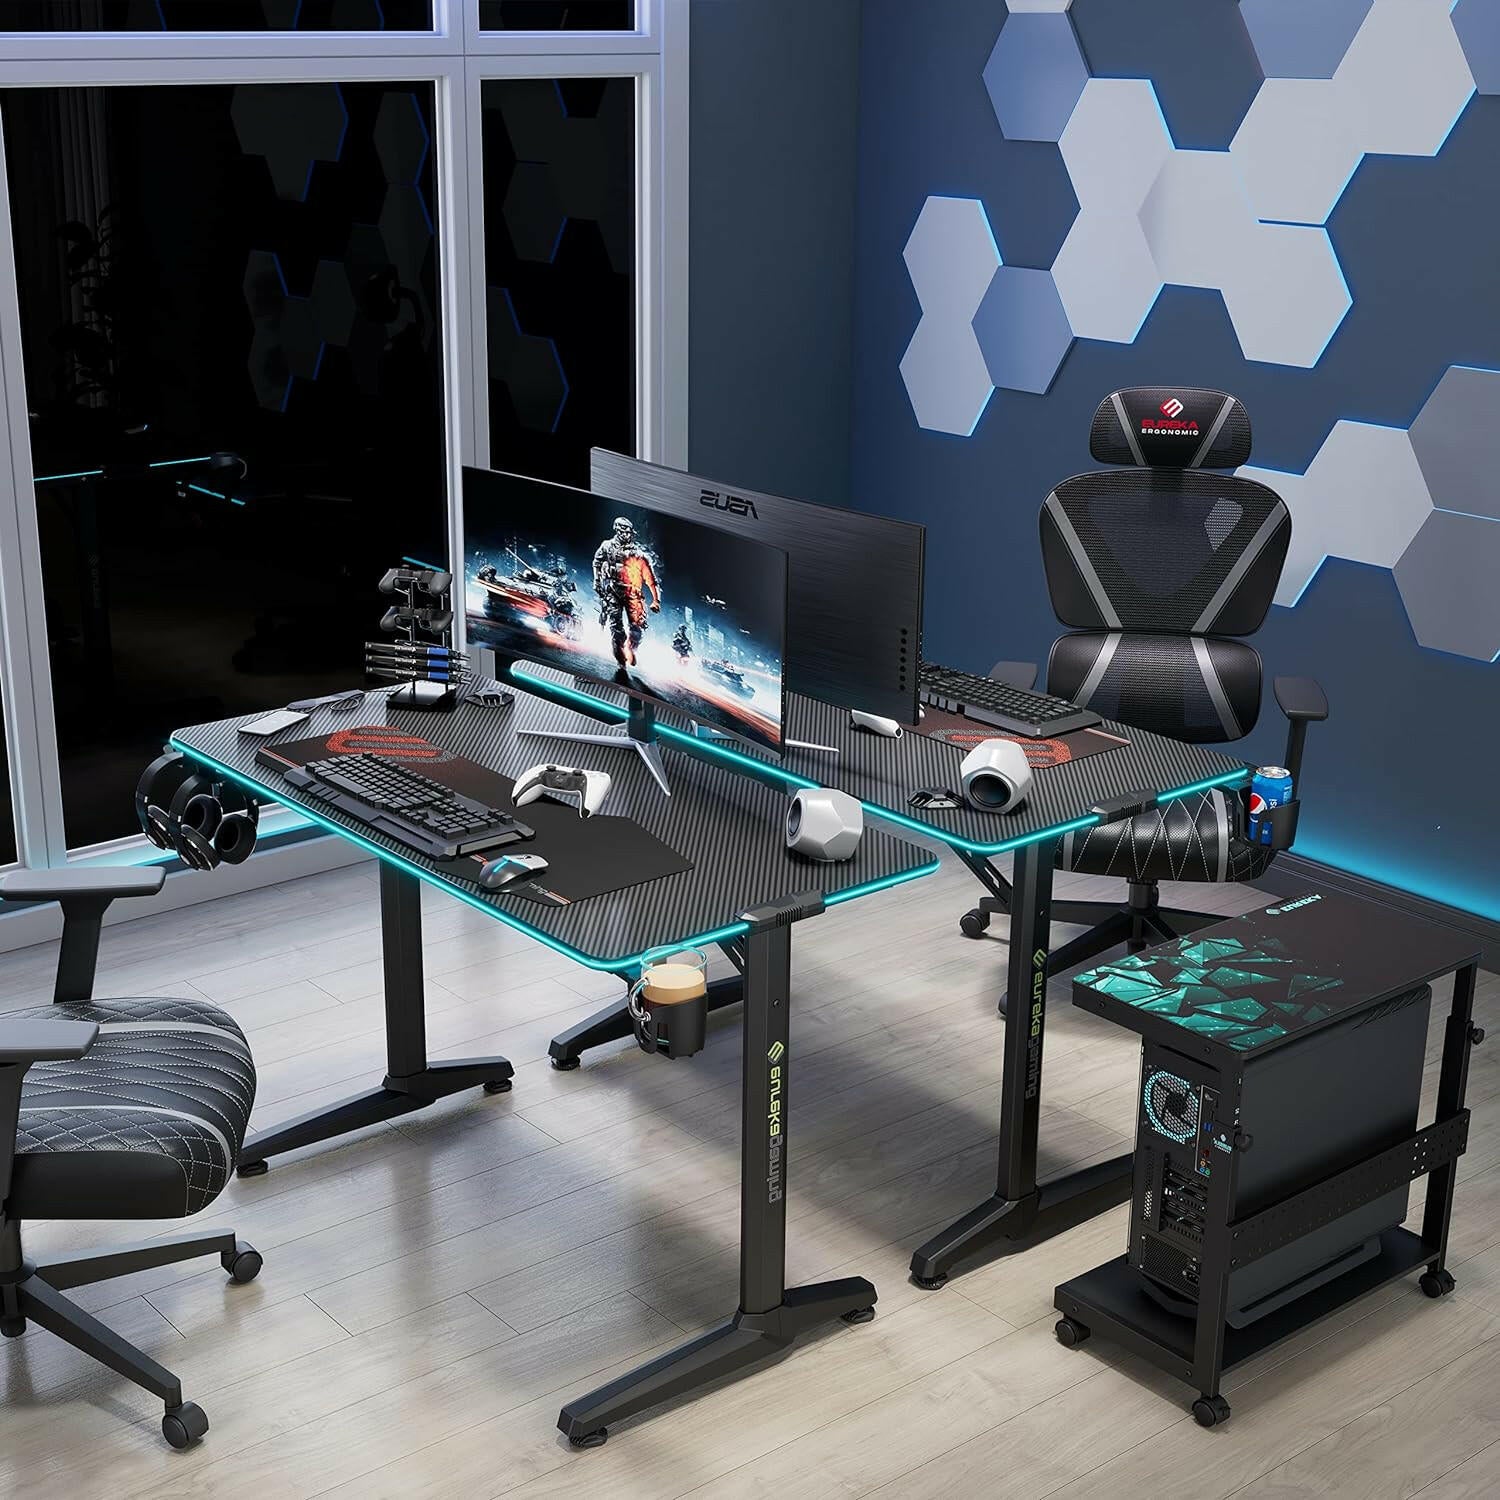 EUREKA ERGONOMIC Carbon Fibre Plastic Gaming Computer Desk 55 Home Office  Gaming PC Tables New Polygon Finish Legs Design with RGB LED Lights